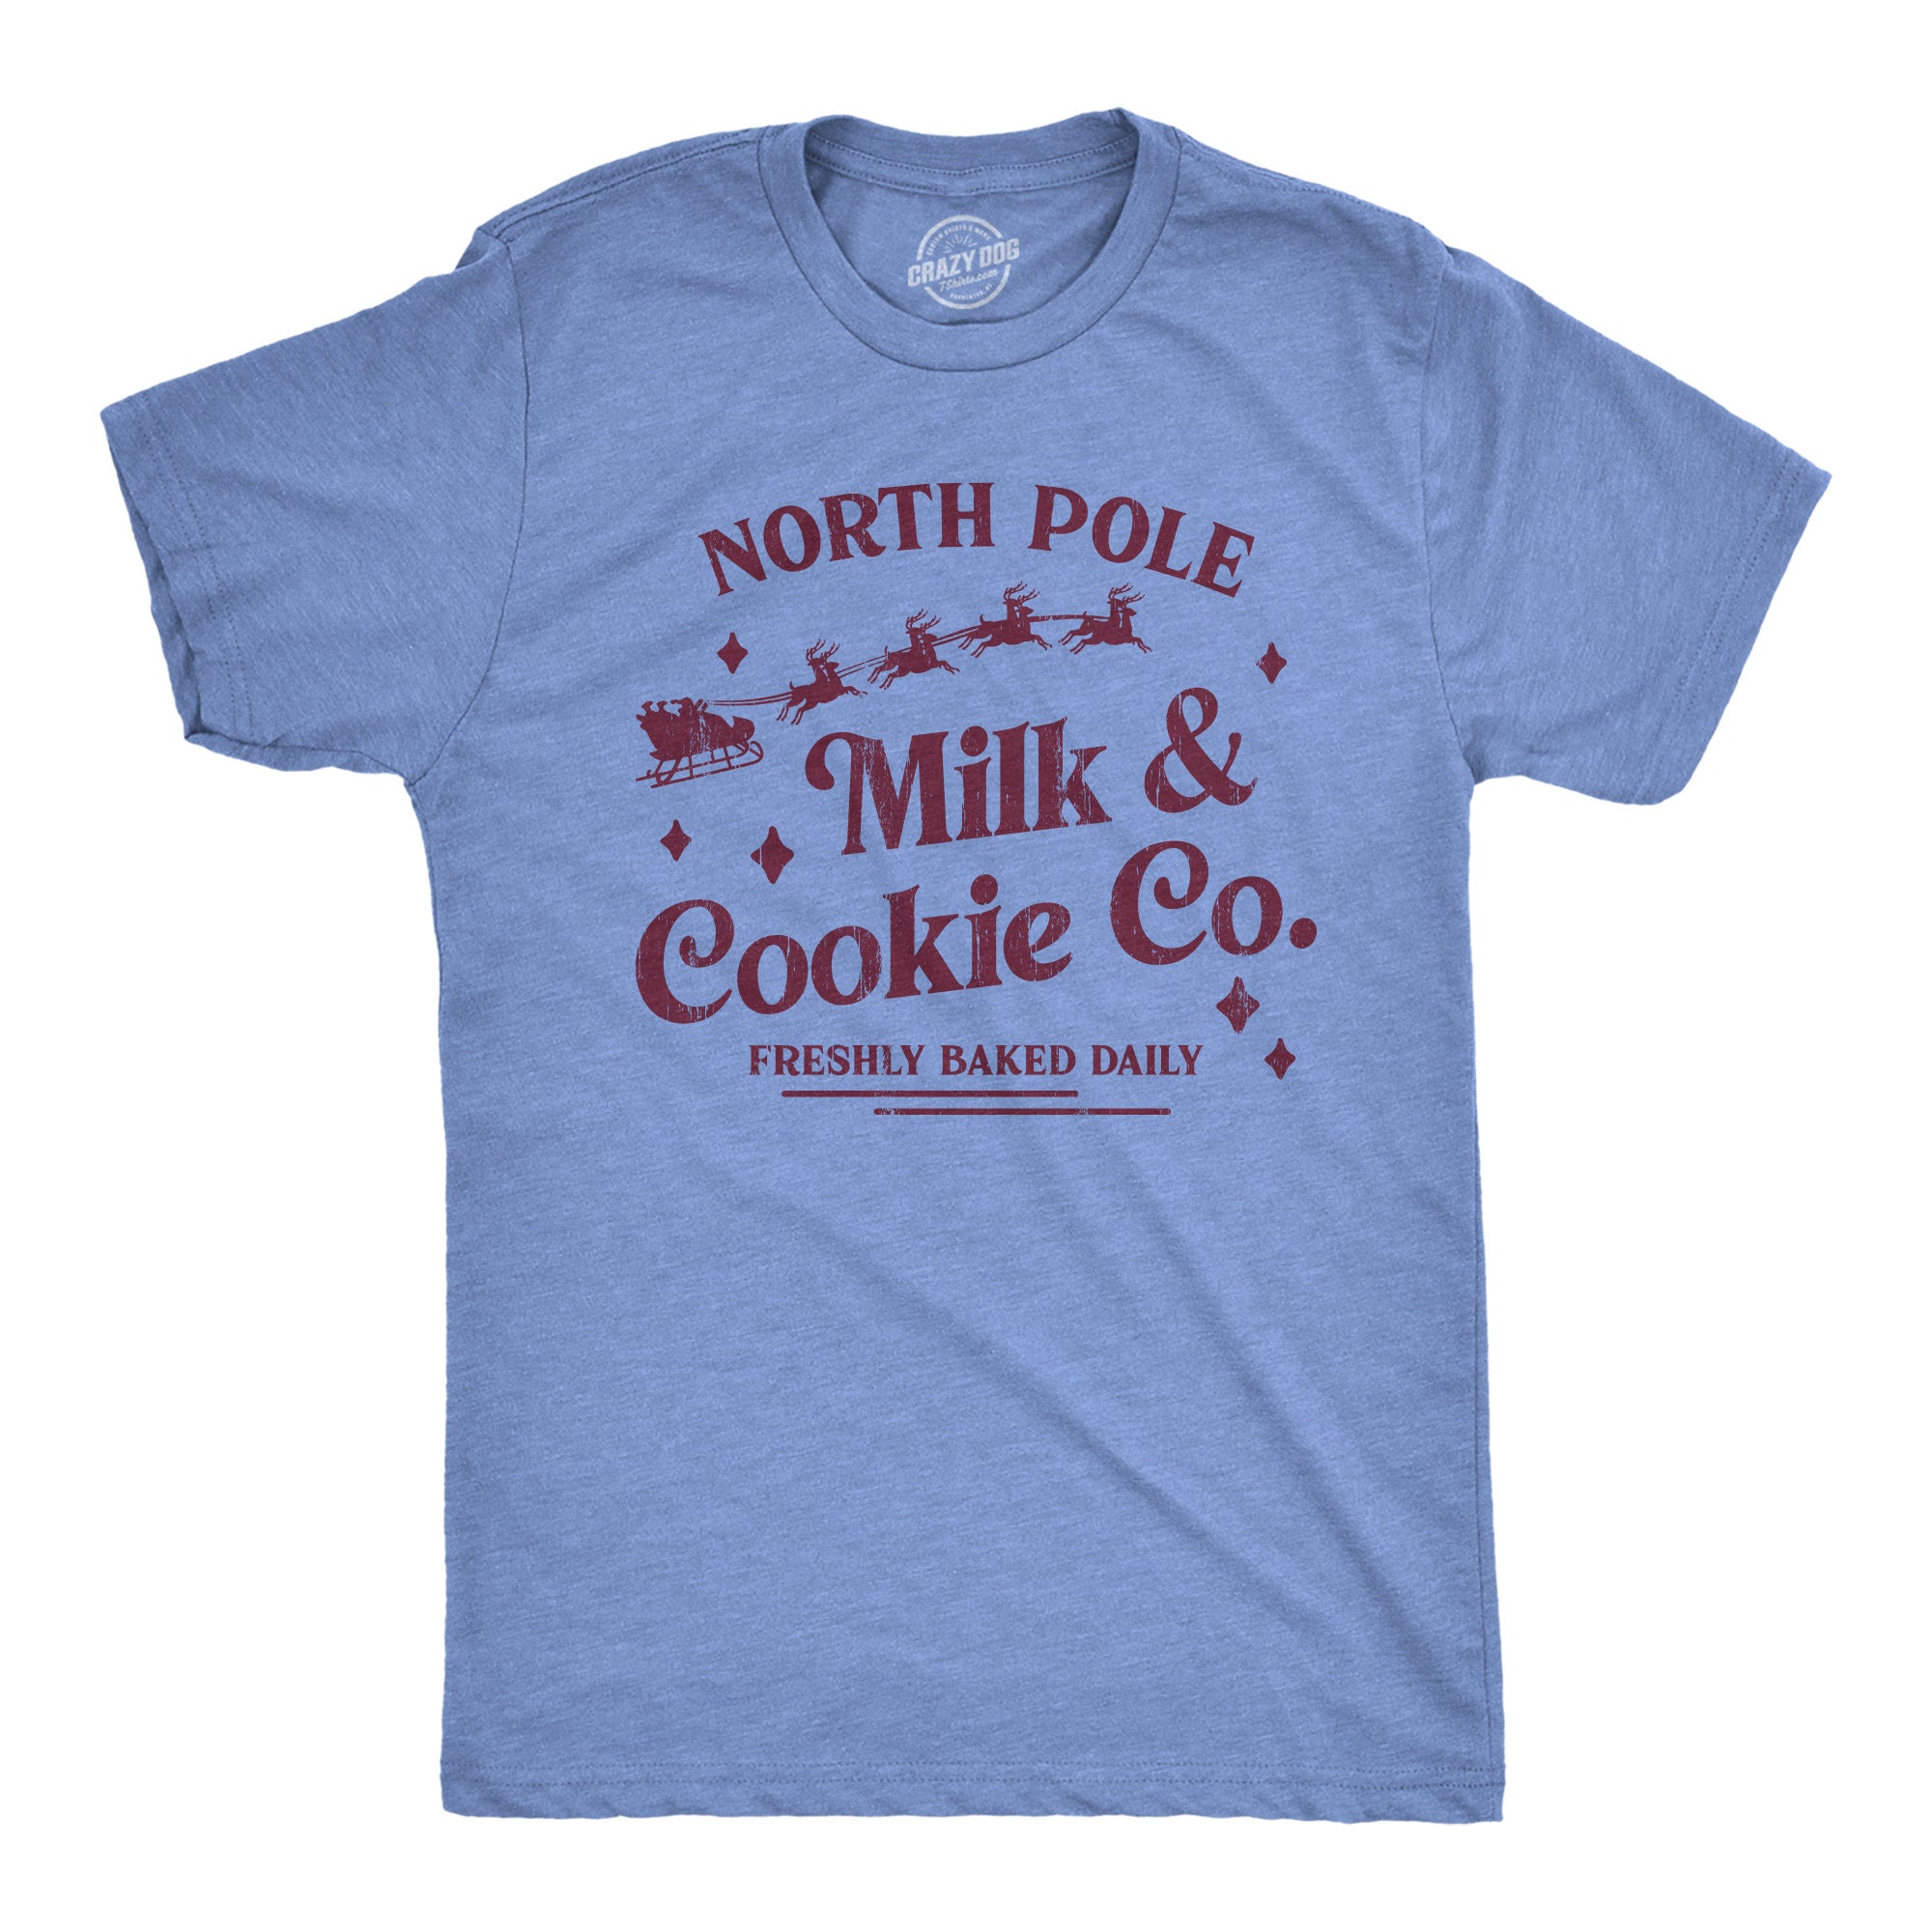 Funny Light Heather Blue - NORTHPOLE North Pole Milk And Cookie Co Mens T Shirt Nerdy Christmas Food Tee